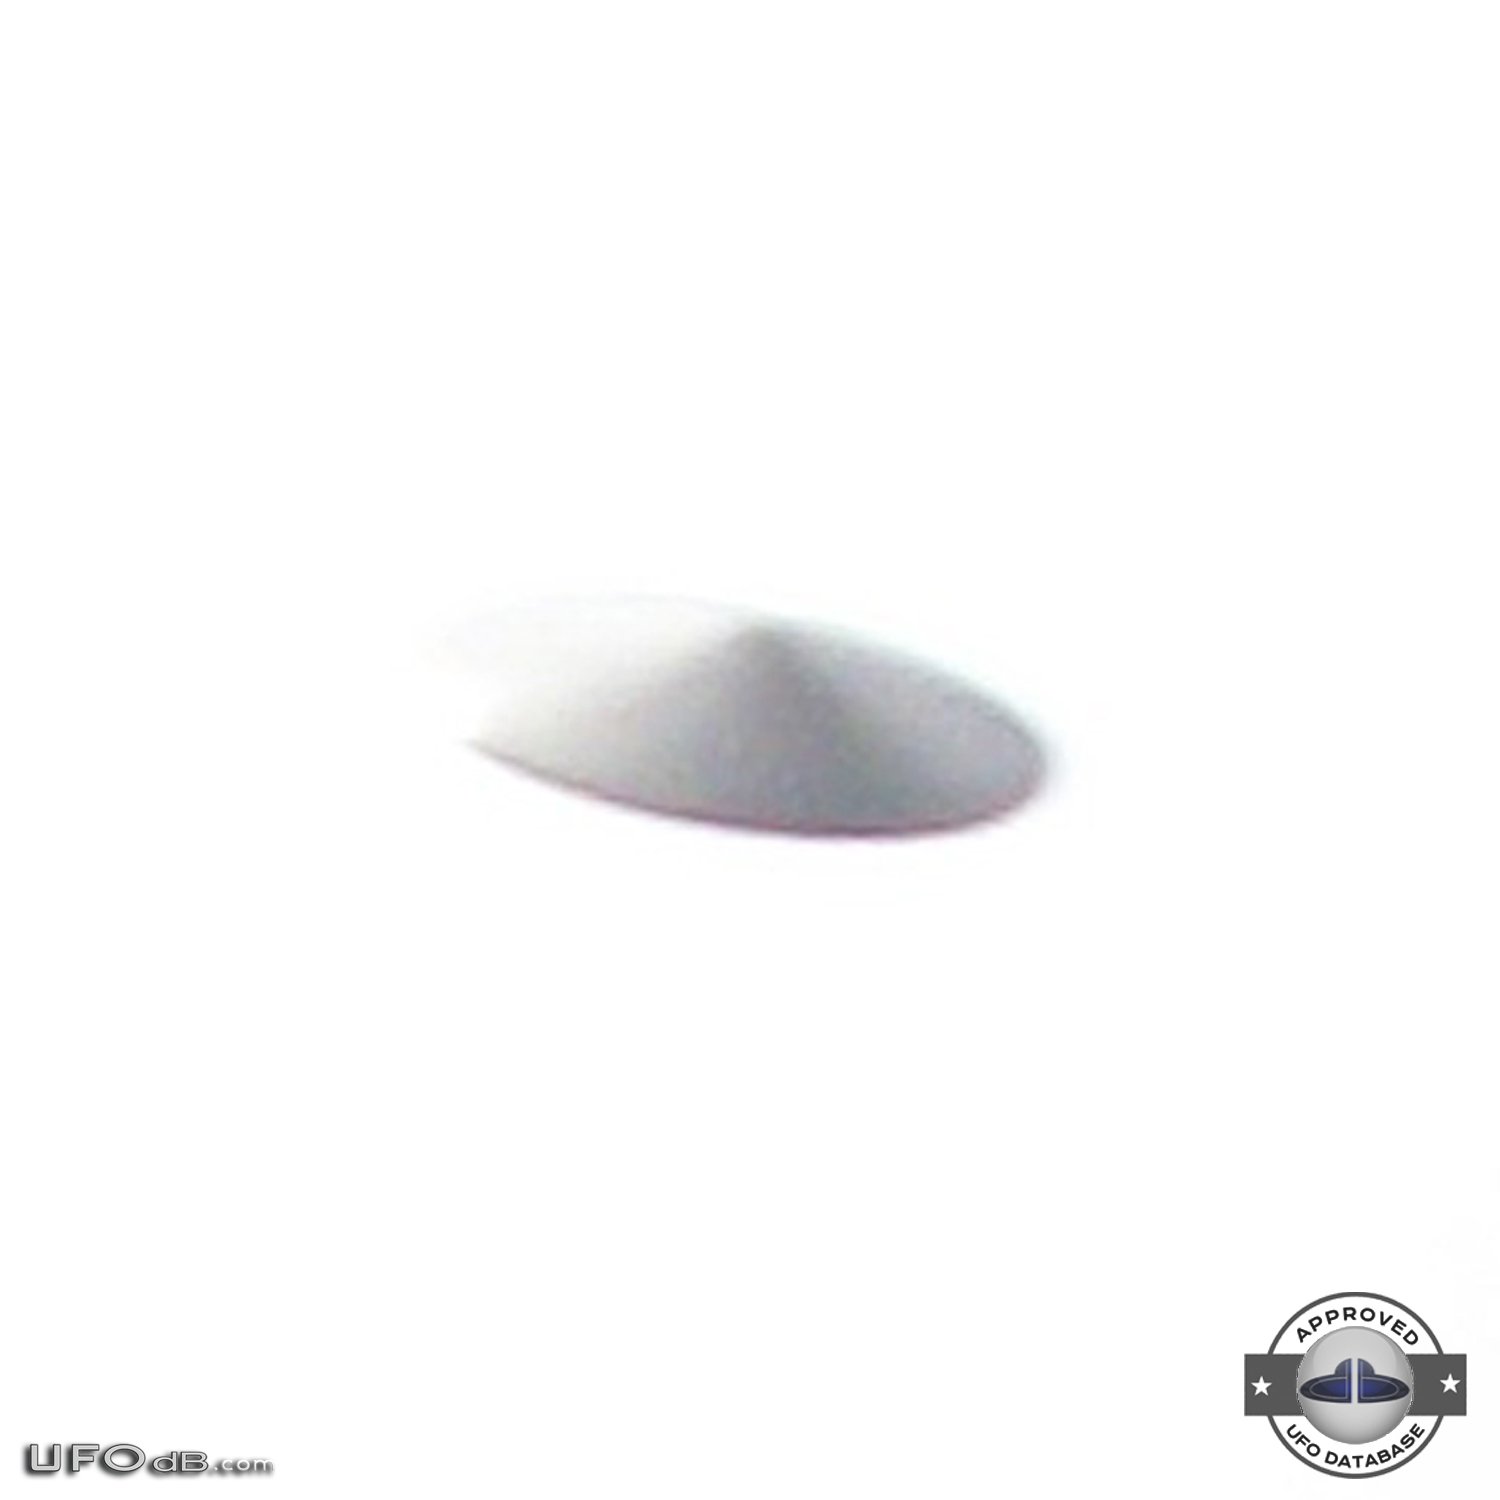 Silver saucer UFO caught on picture in Bristol, England UK - 2010 UFO Picture #412-3